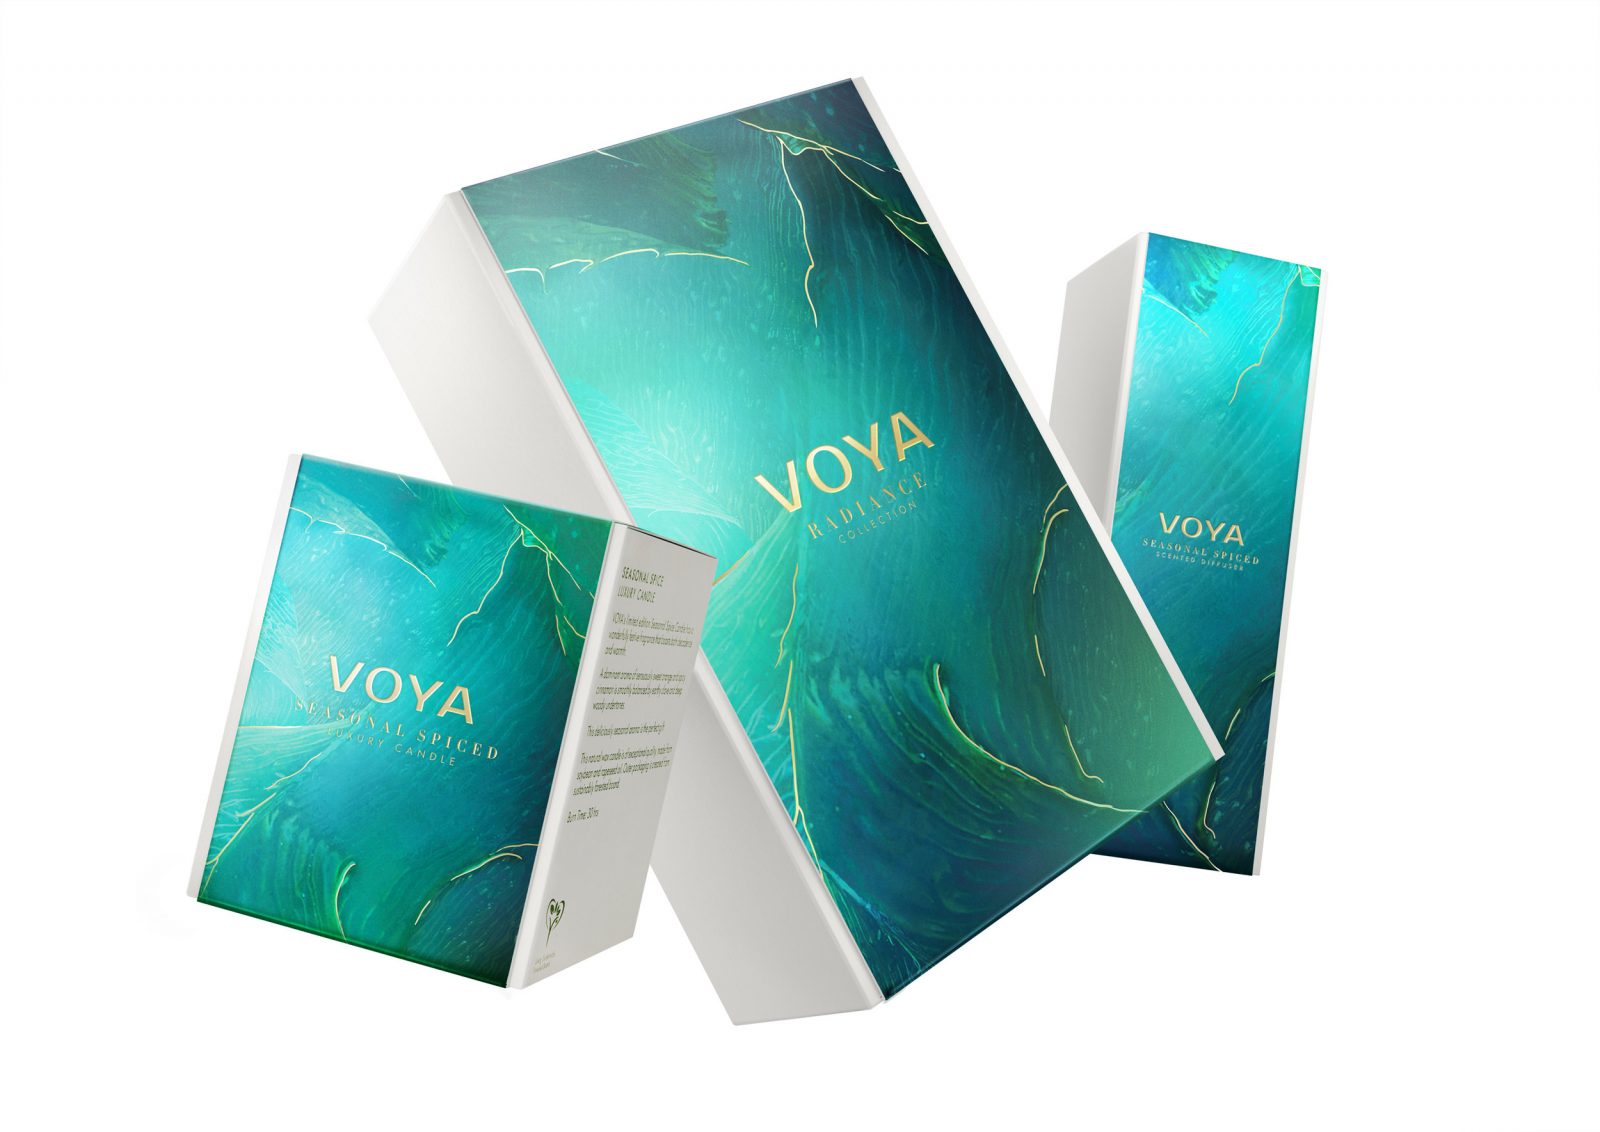 Butterfly Cannon Create Limited Edition Packaging and Communications for Luxury Organic Spa Brand VOYA